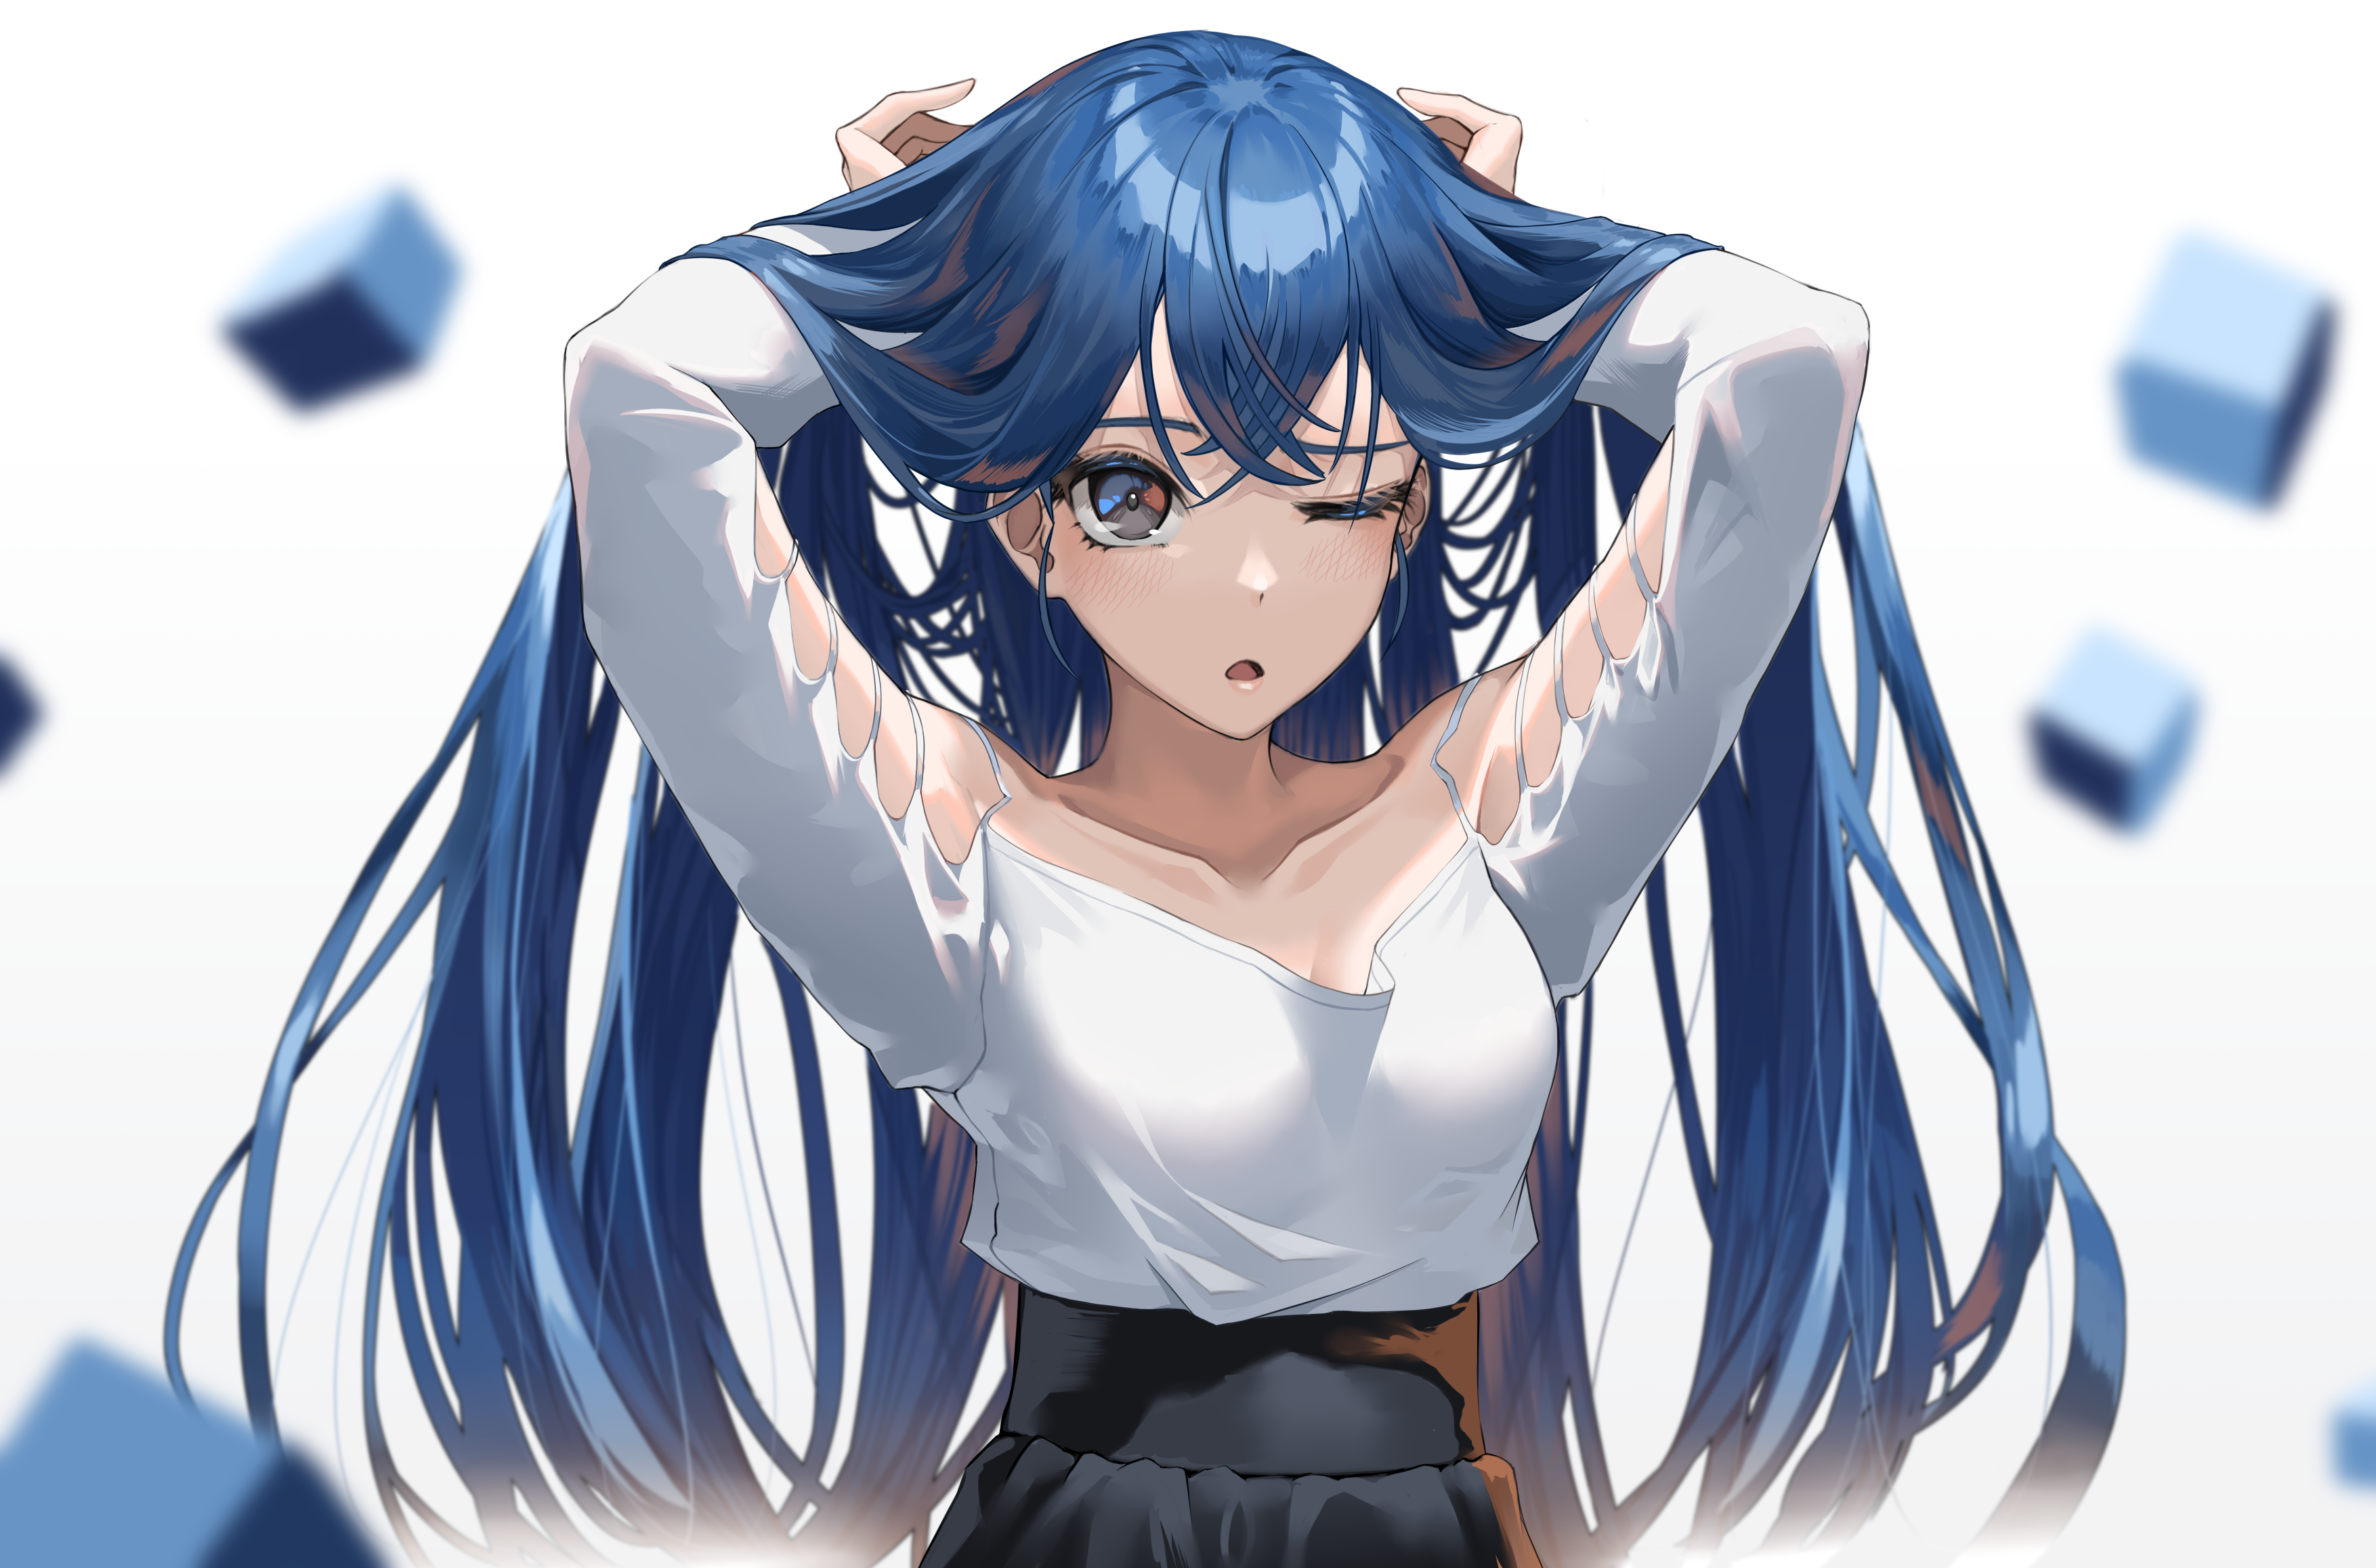 30 Blue Haired Anime Girls That Catch Your Eyes